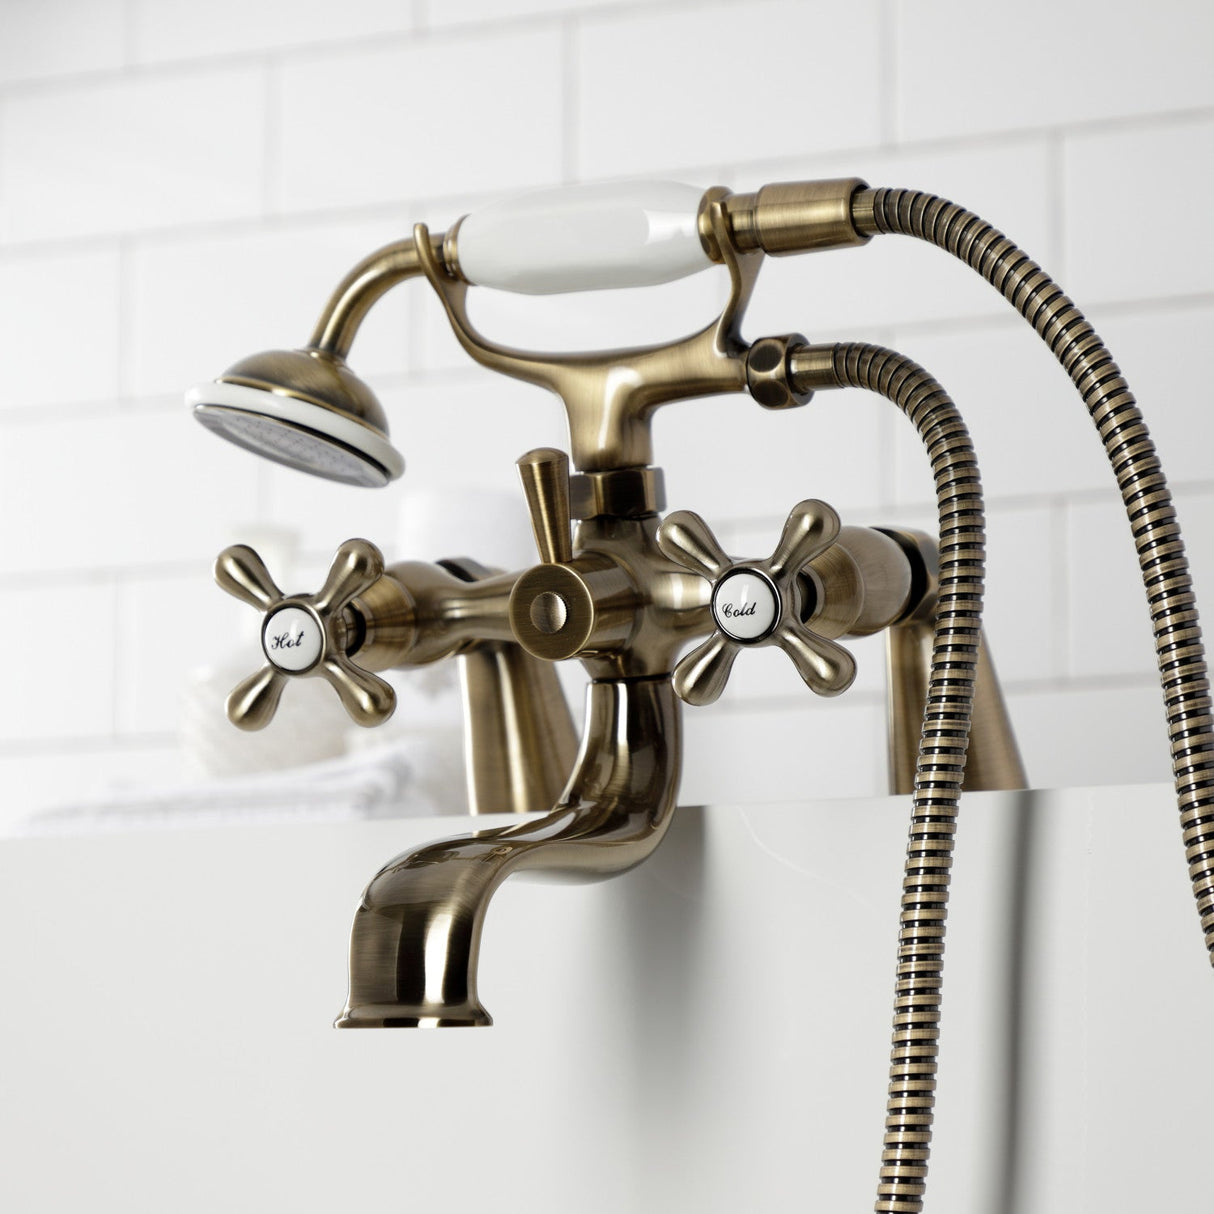 Kingston KS227AB Three-Handle 2-Hole Deck Mount Clawfoot Tub Faucet with Handshower, Antique Brass